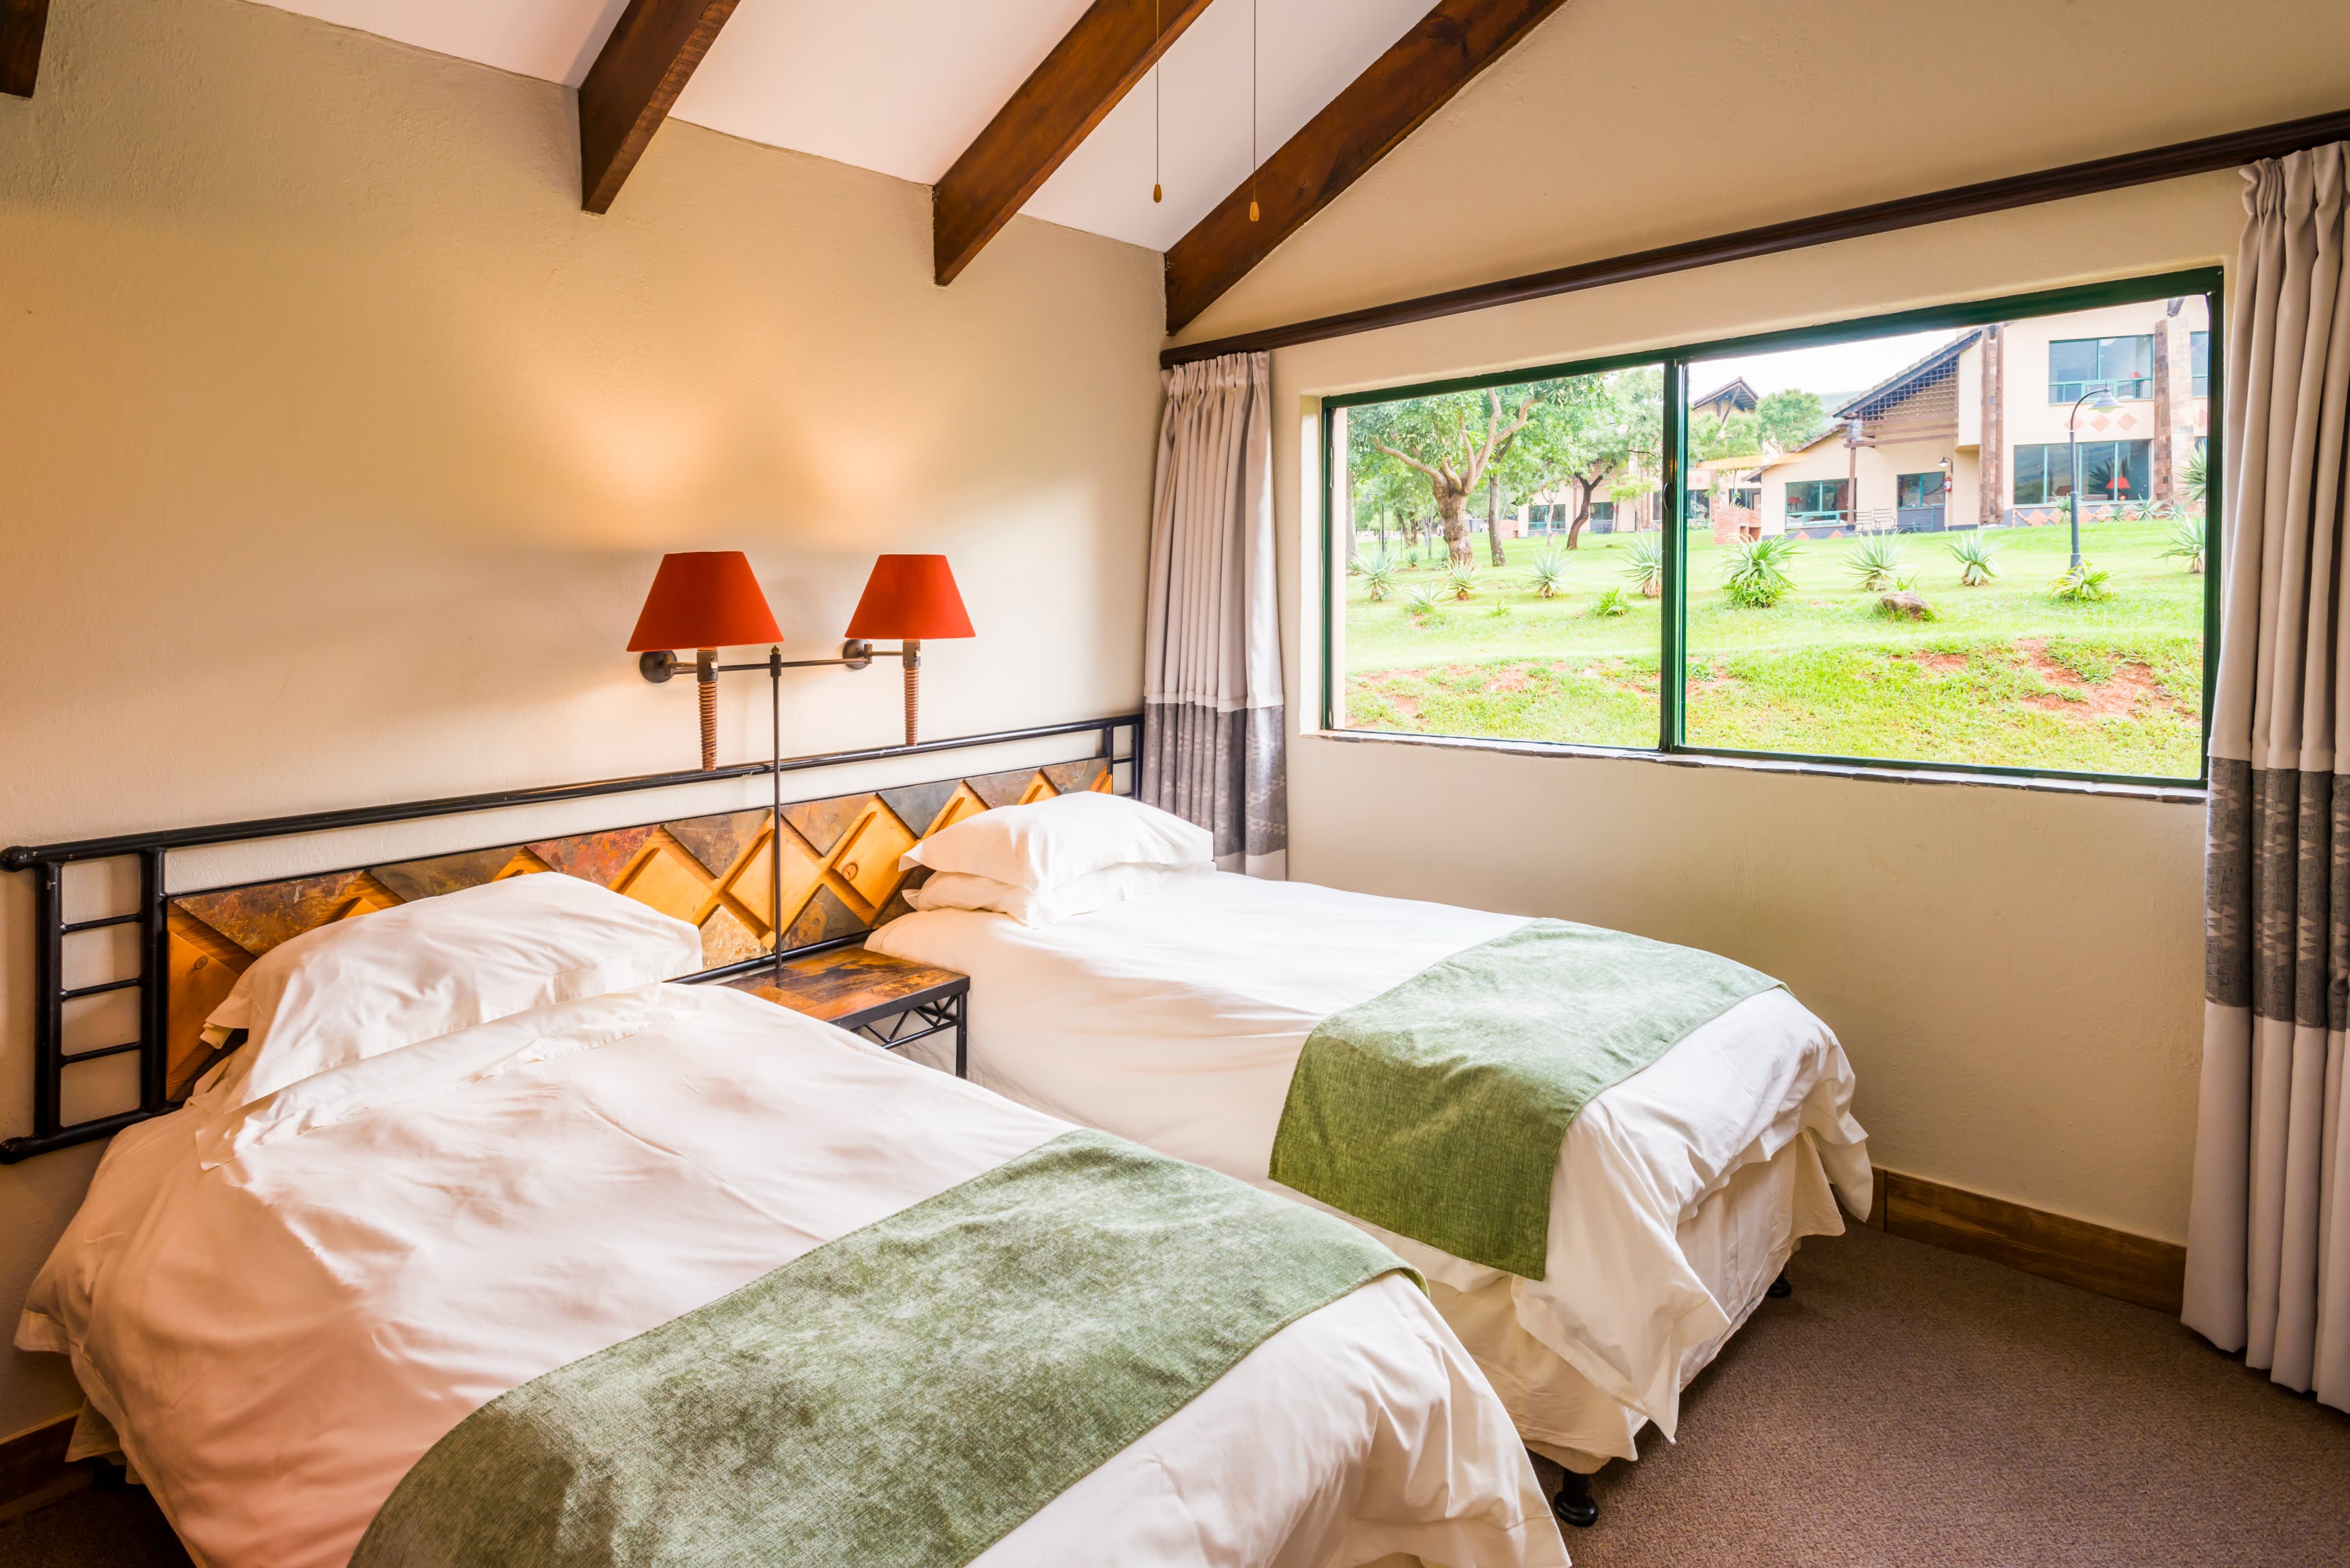 APRIL 24 SPECIAL! Alpine Heath Resort KZN: Self-Catering Stays in a Chalet for up to 6 people- Midweek + Weekend Rates Available!